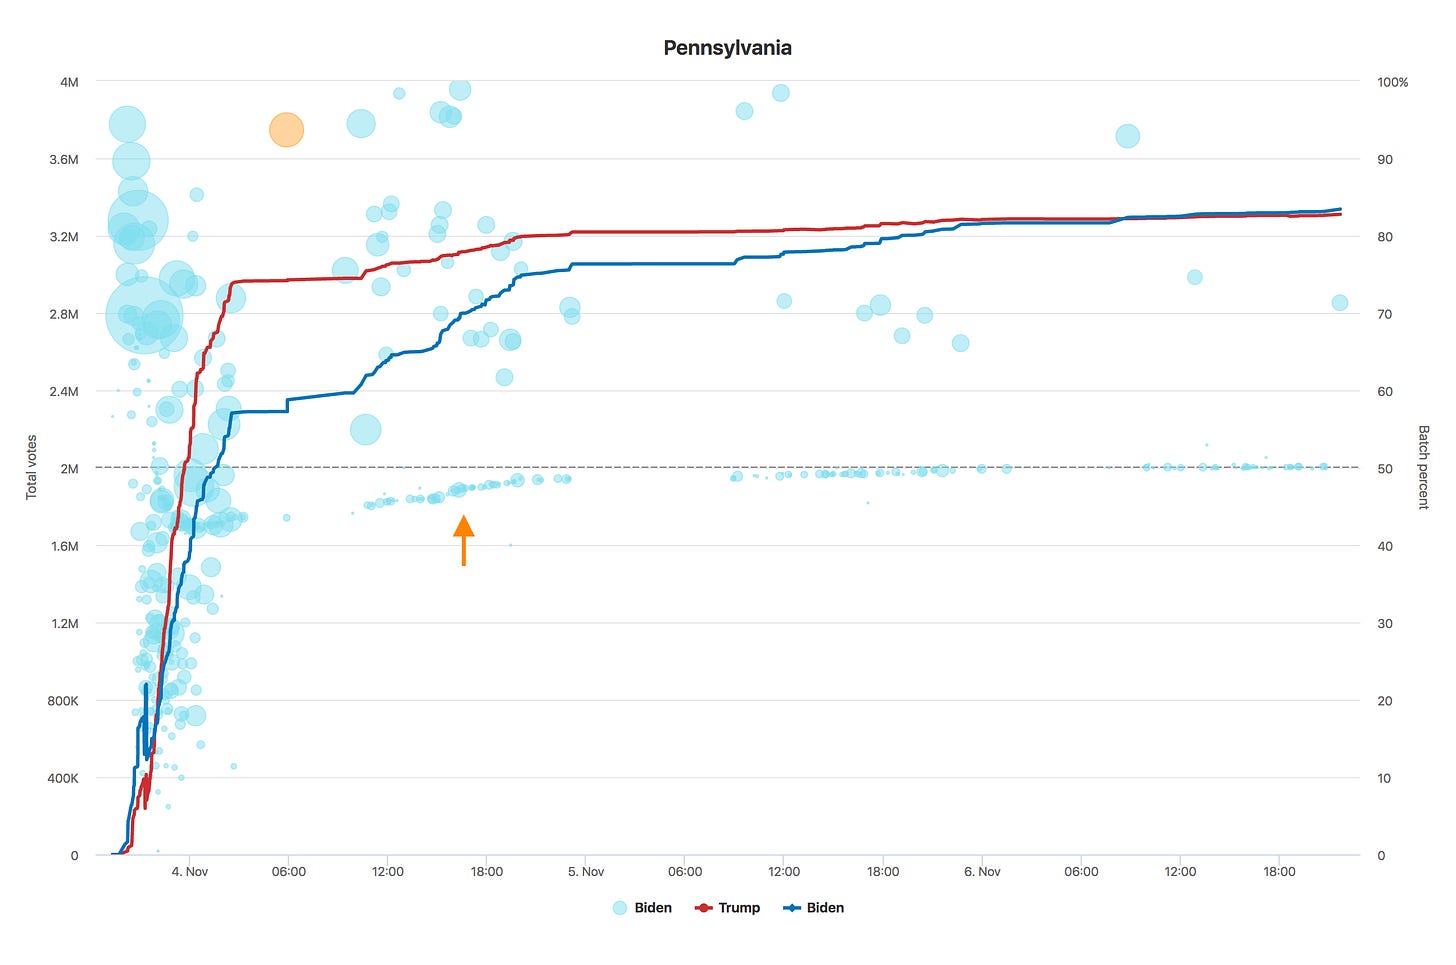 Chart of Pennsylvania voting data over time